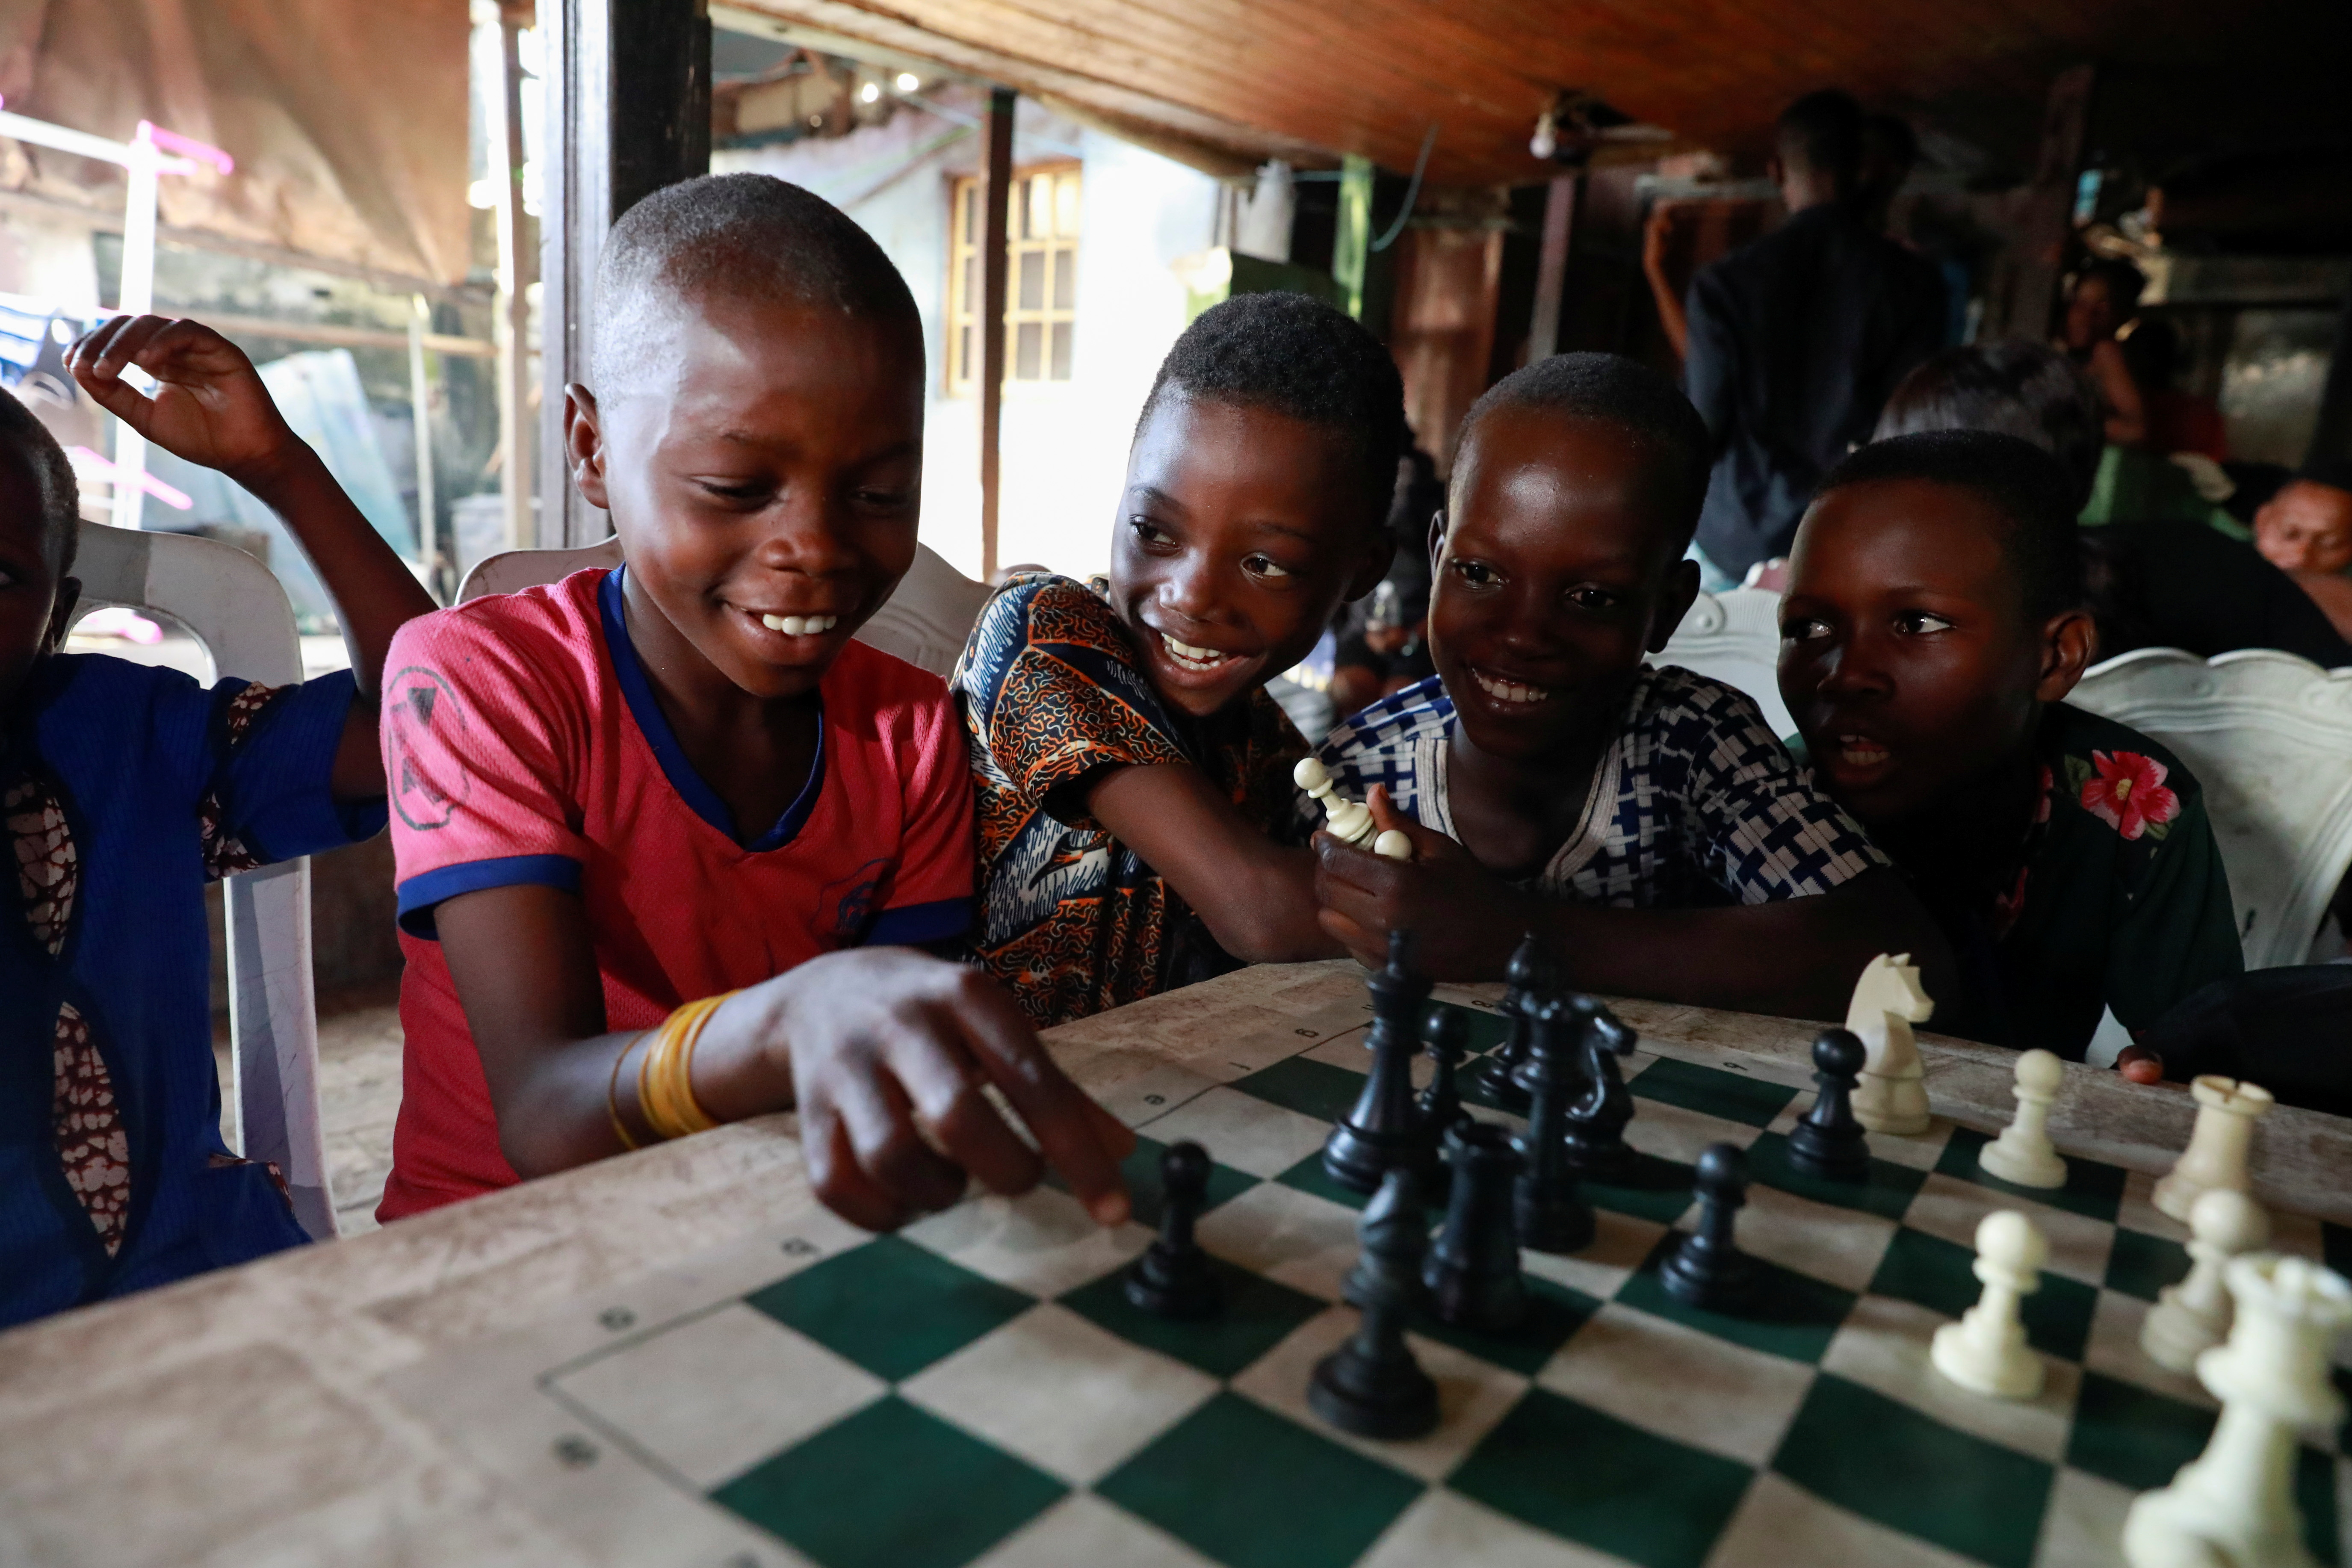 Children play chess at a community palace in Makoko, Lagos